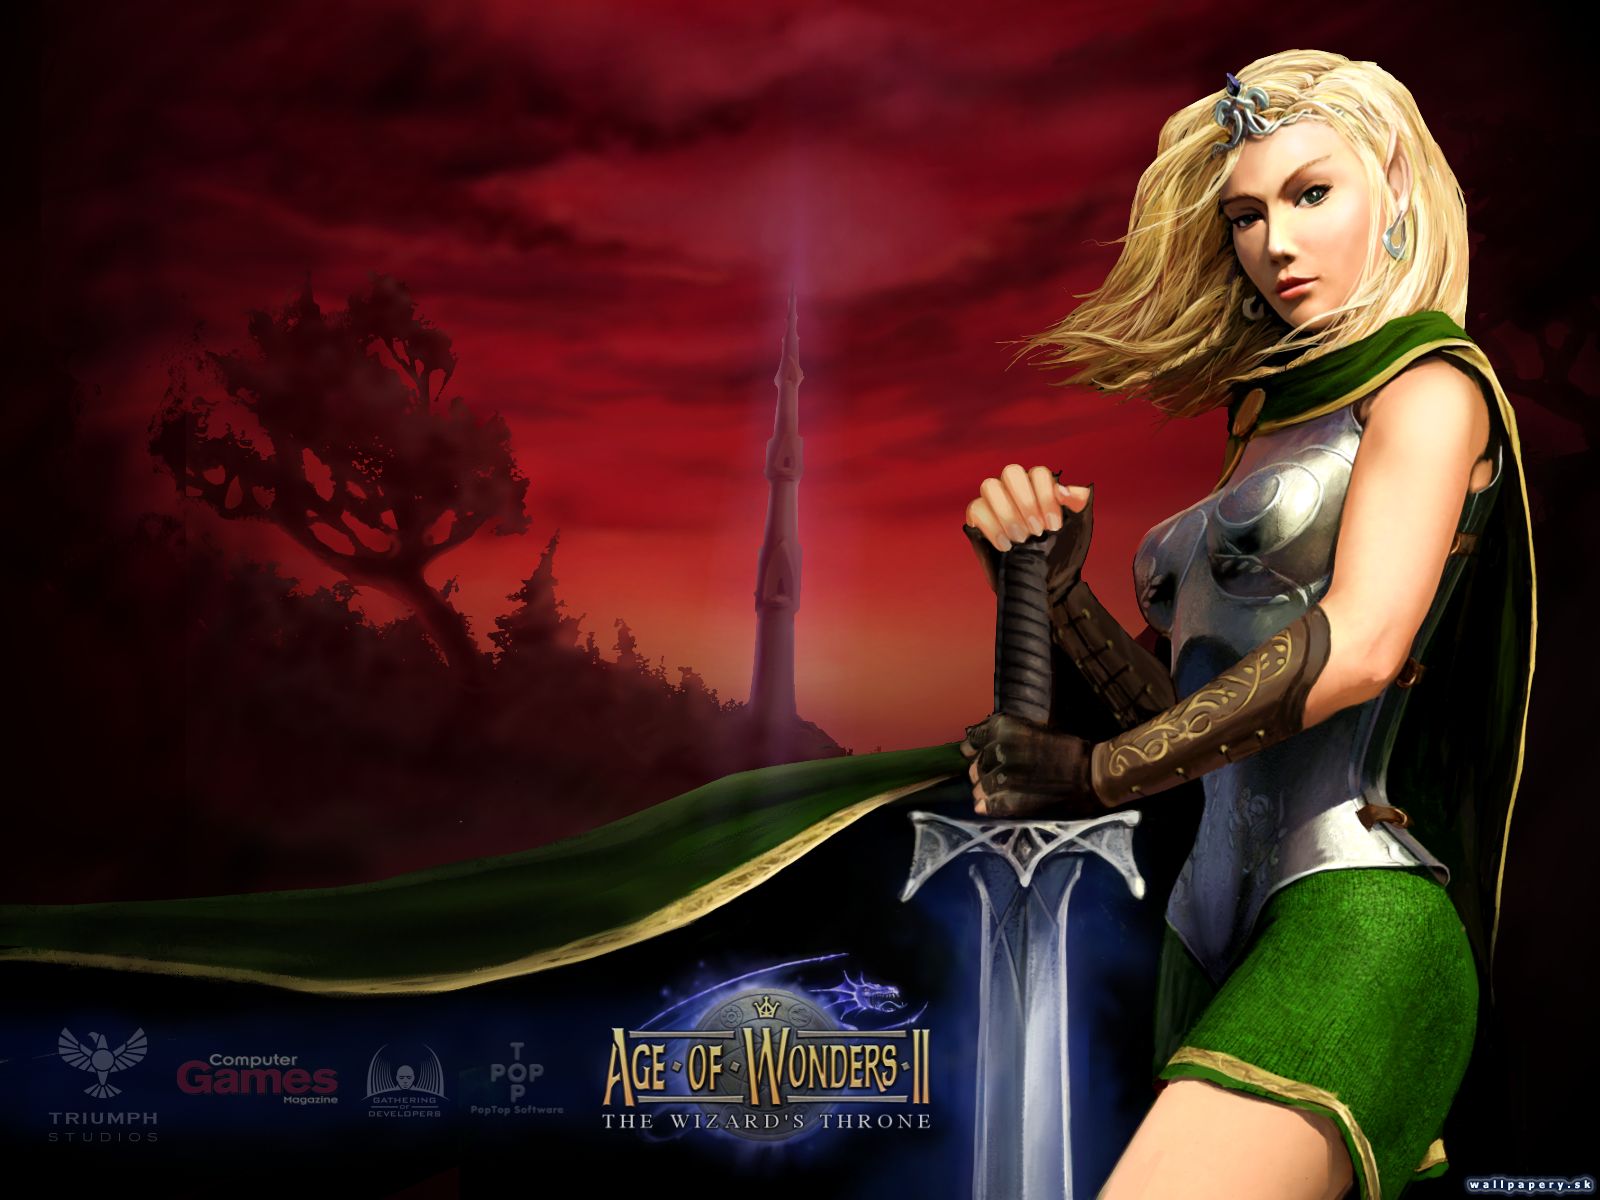 Age of Wonders 2: The Wizard's Throne - wallpaper 1